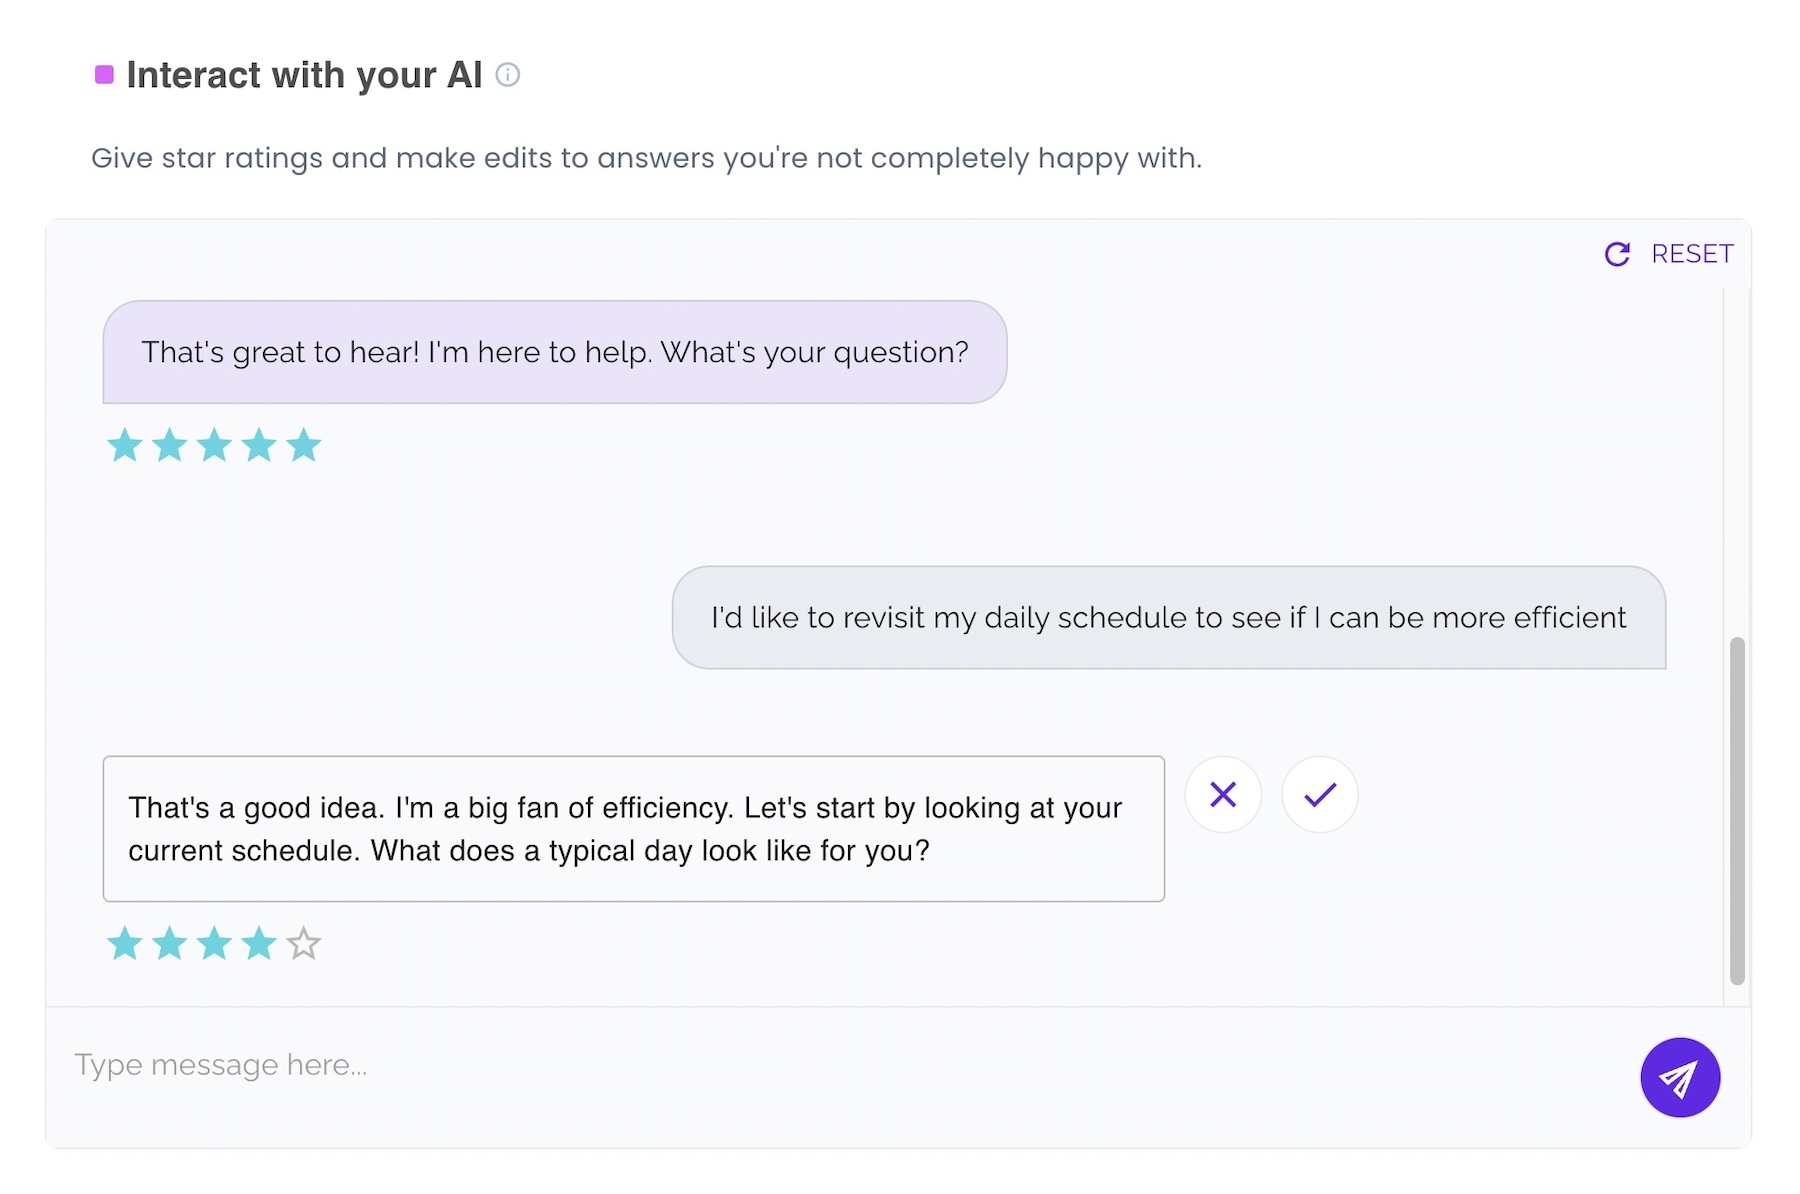 Chat to your AI self to fine tune its responses